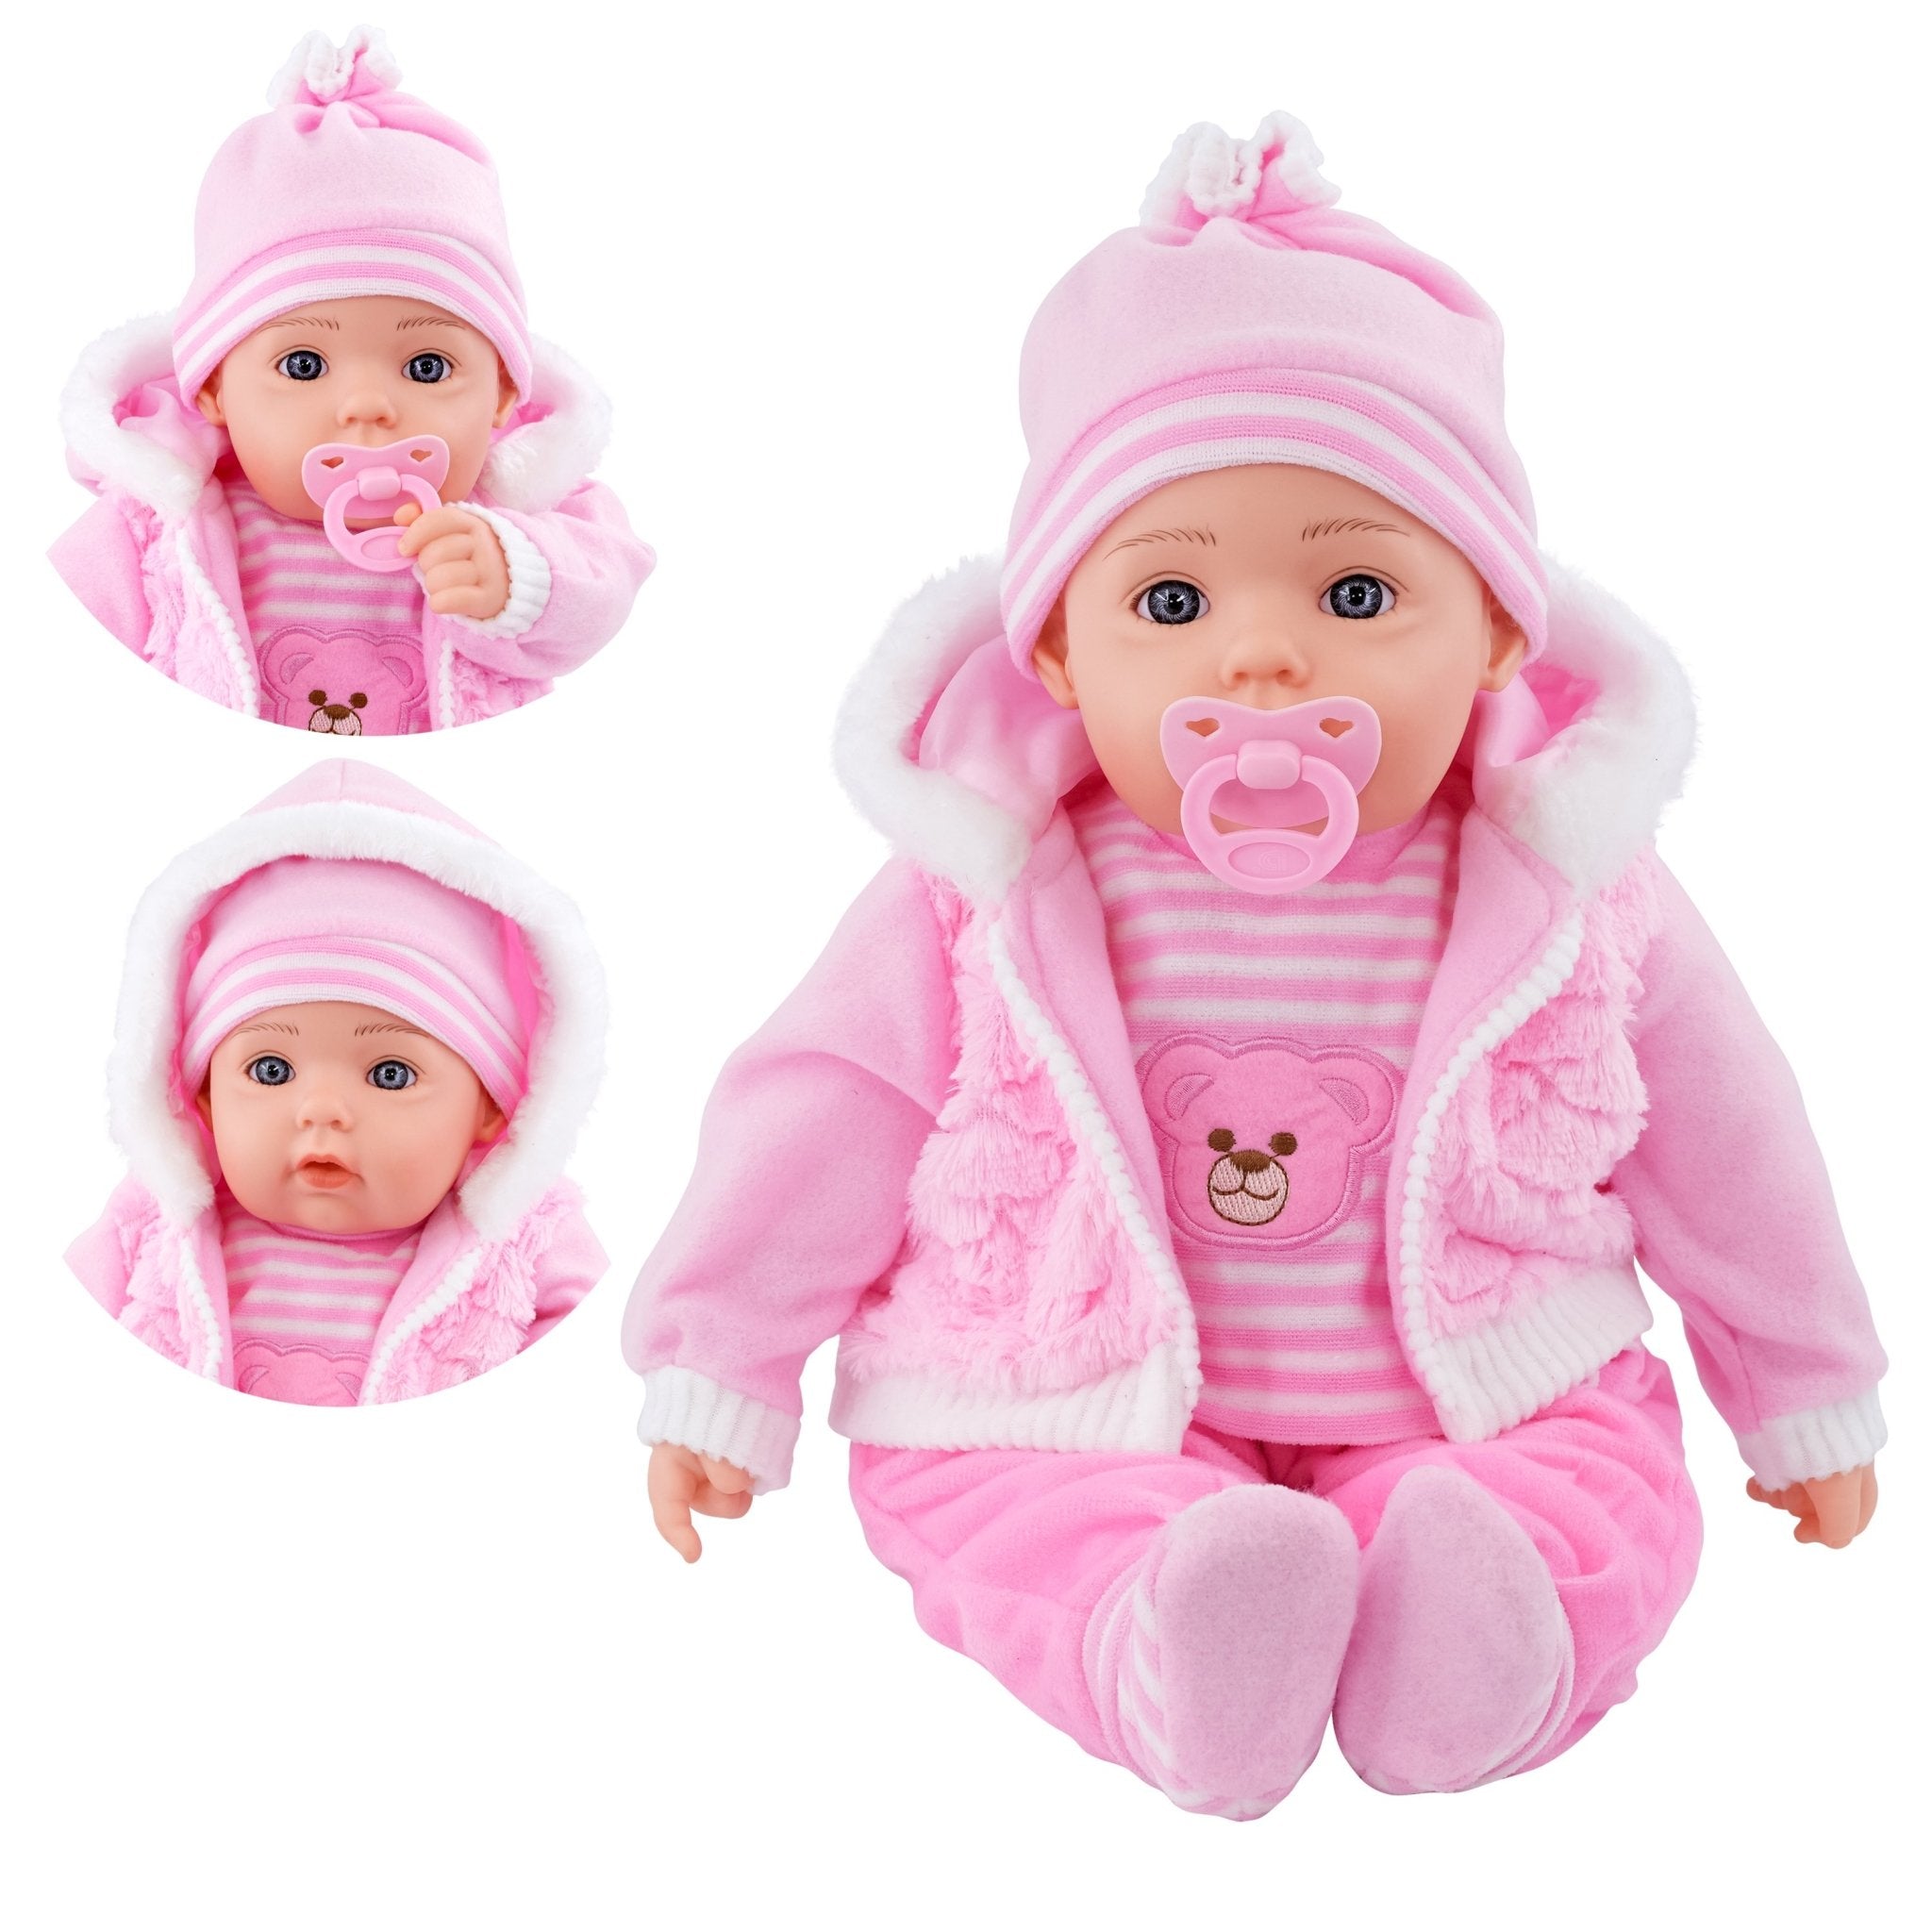 Baby Pink Bibi Baby Doll Toy With Dummy & Sounds by BiBi DollThe